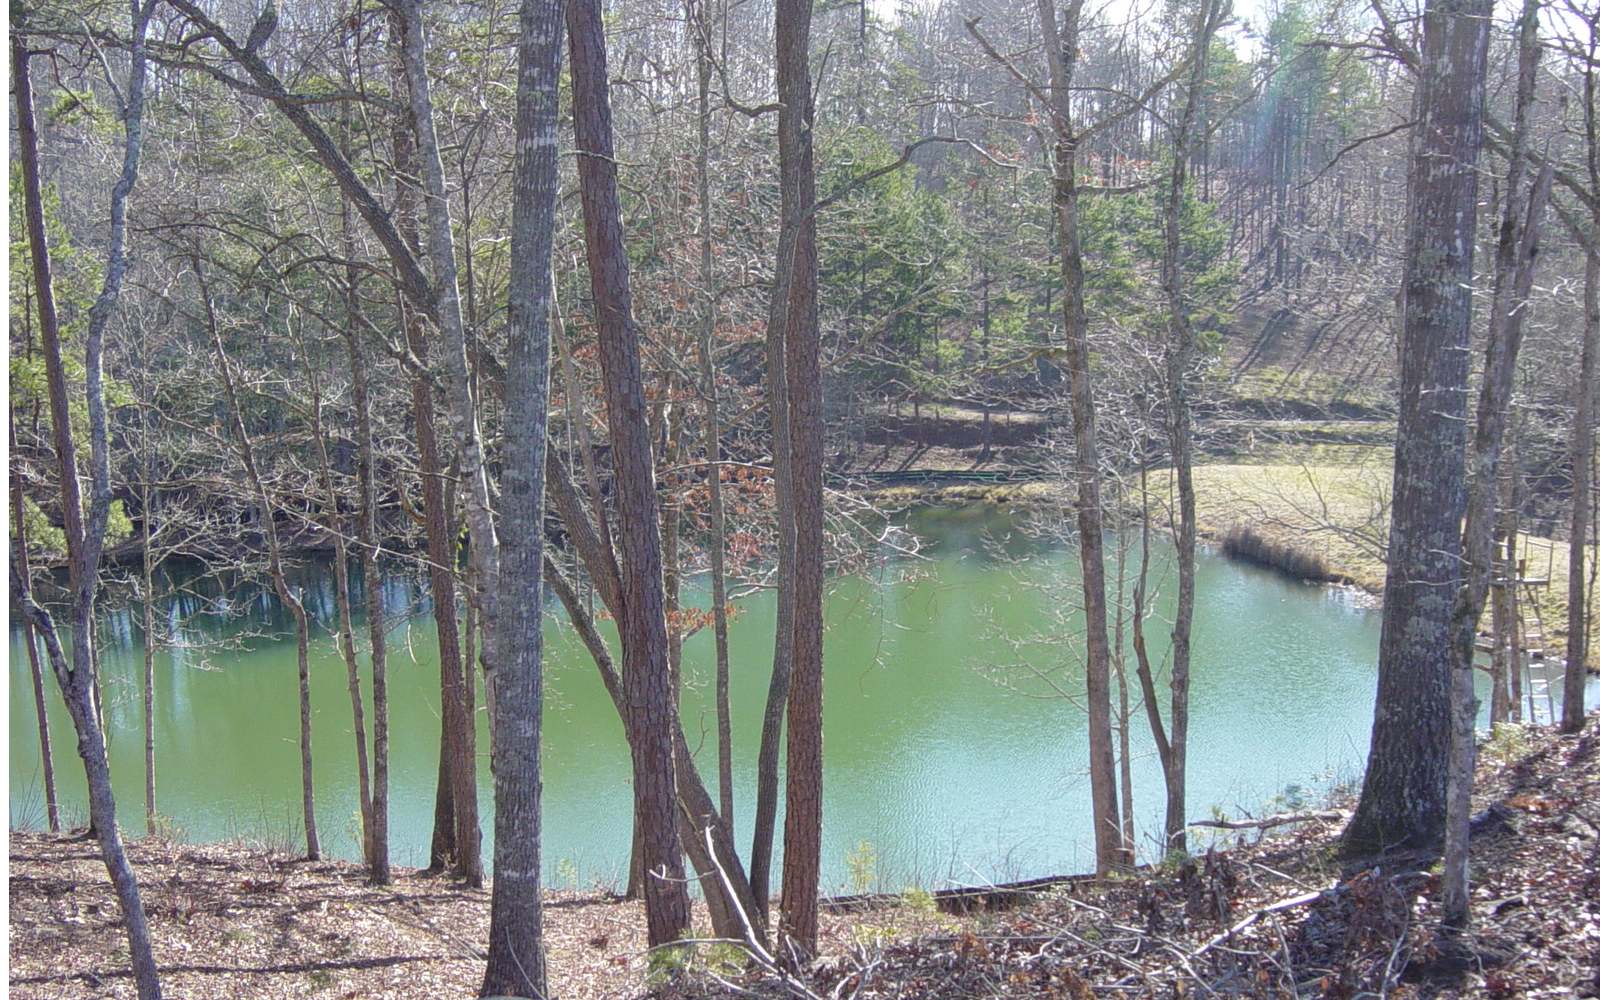 Beautiful Lot 1.34 acres in gated upscale quiet neighborhood in Blairsville, Ga. It has a gorgeous pond/lake out back. This Lot has improvements and is ready to build your dream home. Some pictures shown are of it cleared, it is currently wooded. There is a commons area in the neighborhood with picnic tables and platform deck down by the pond/lake. Mountain Views make this perfect.